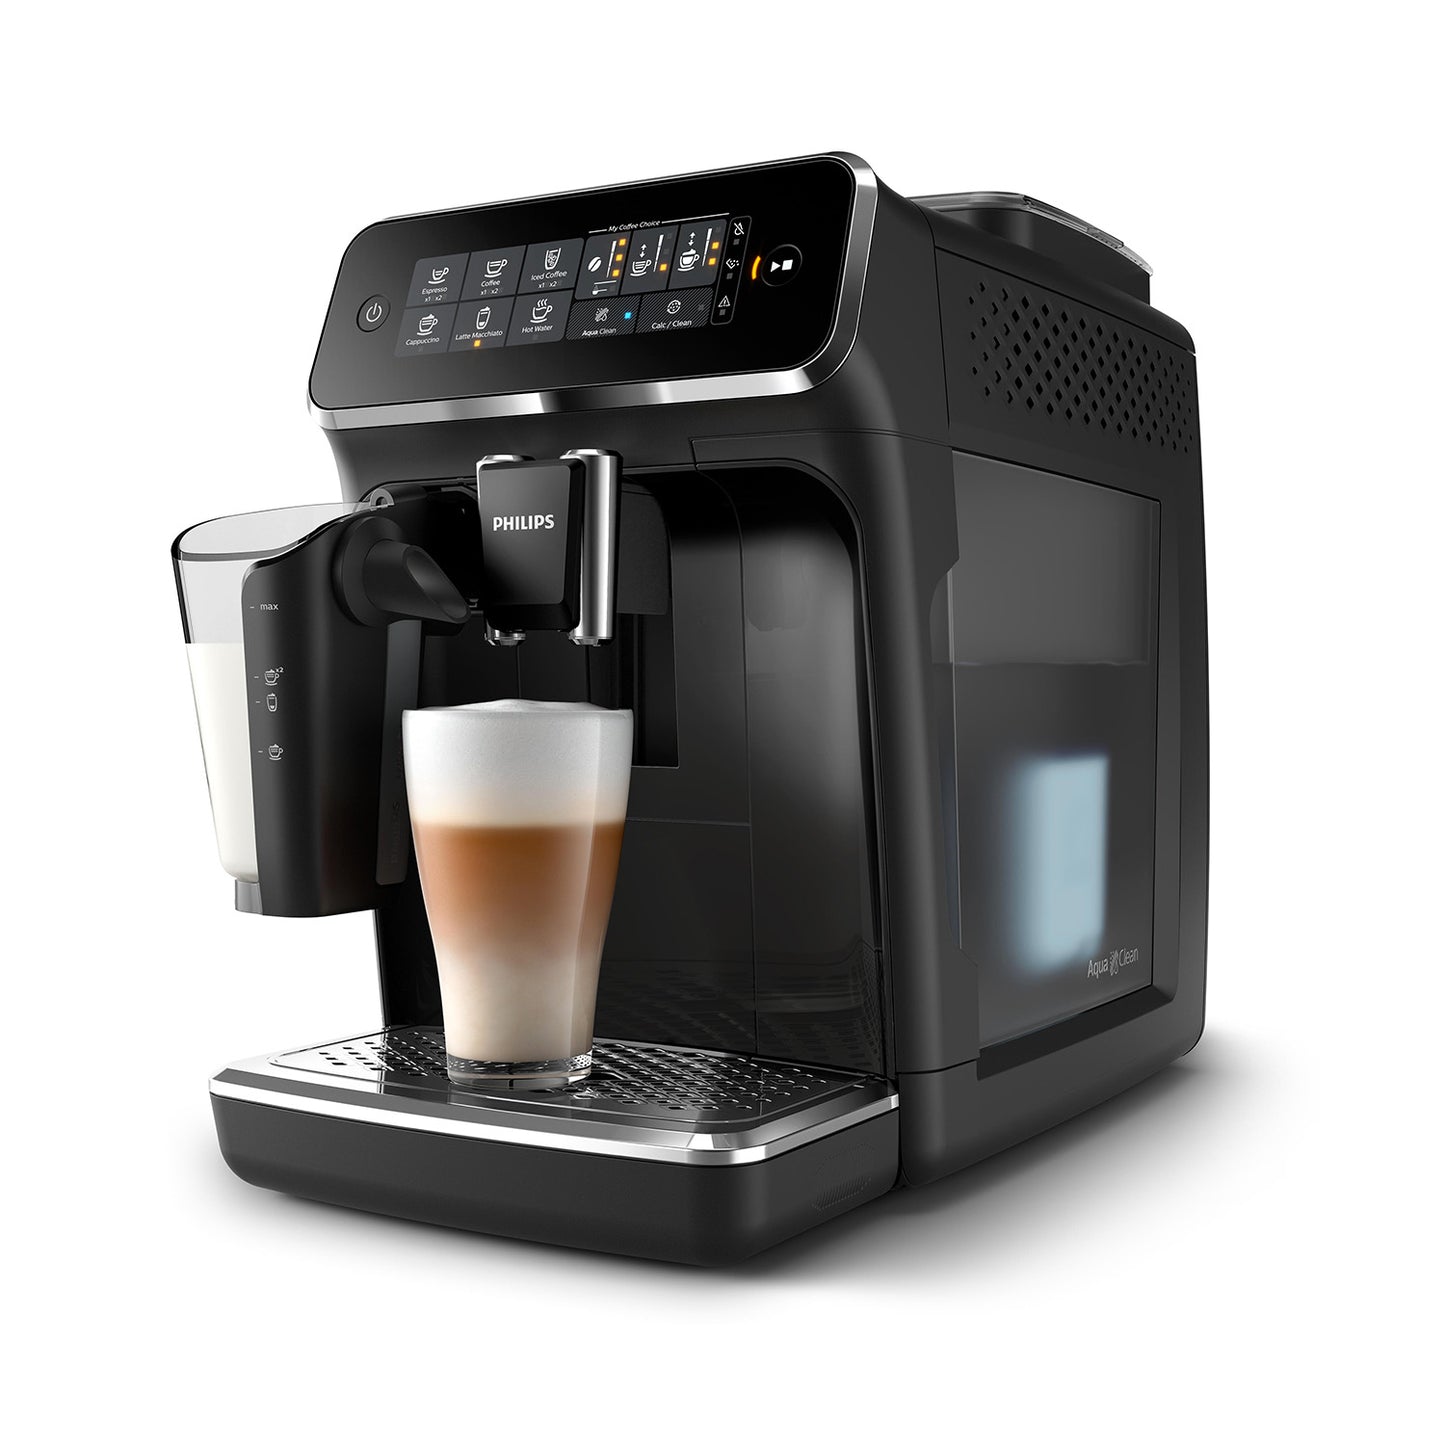 Philips 3200 Series Fully Automatic Espresso Machine - LatteGo with Ice Coffee